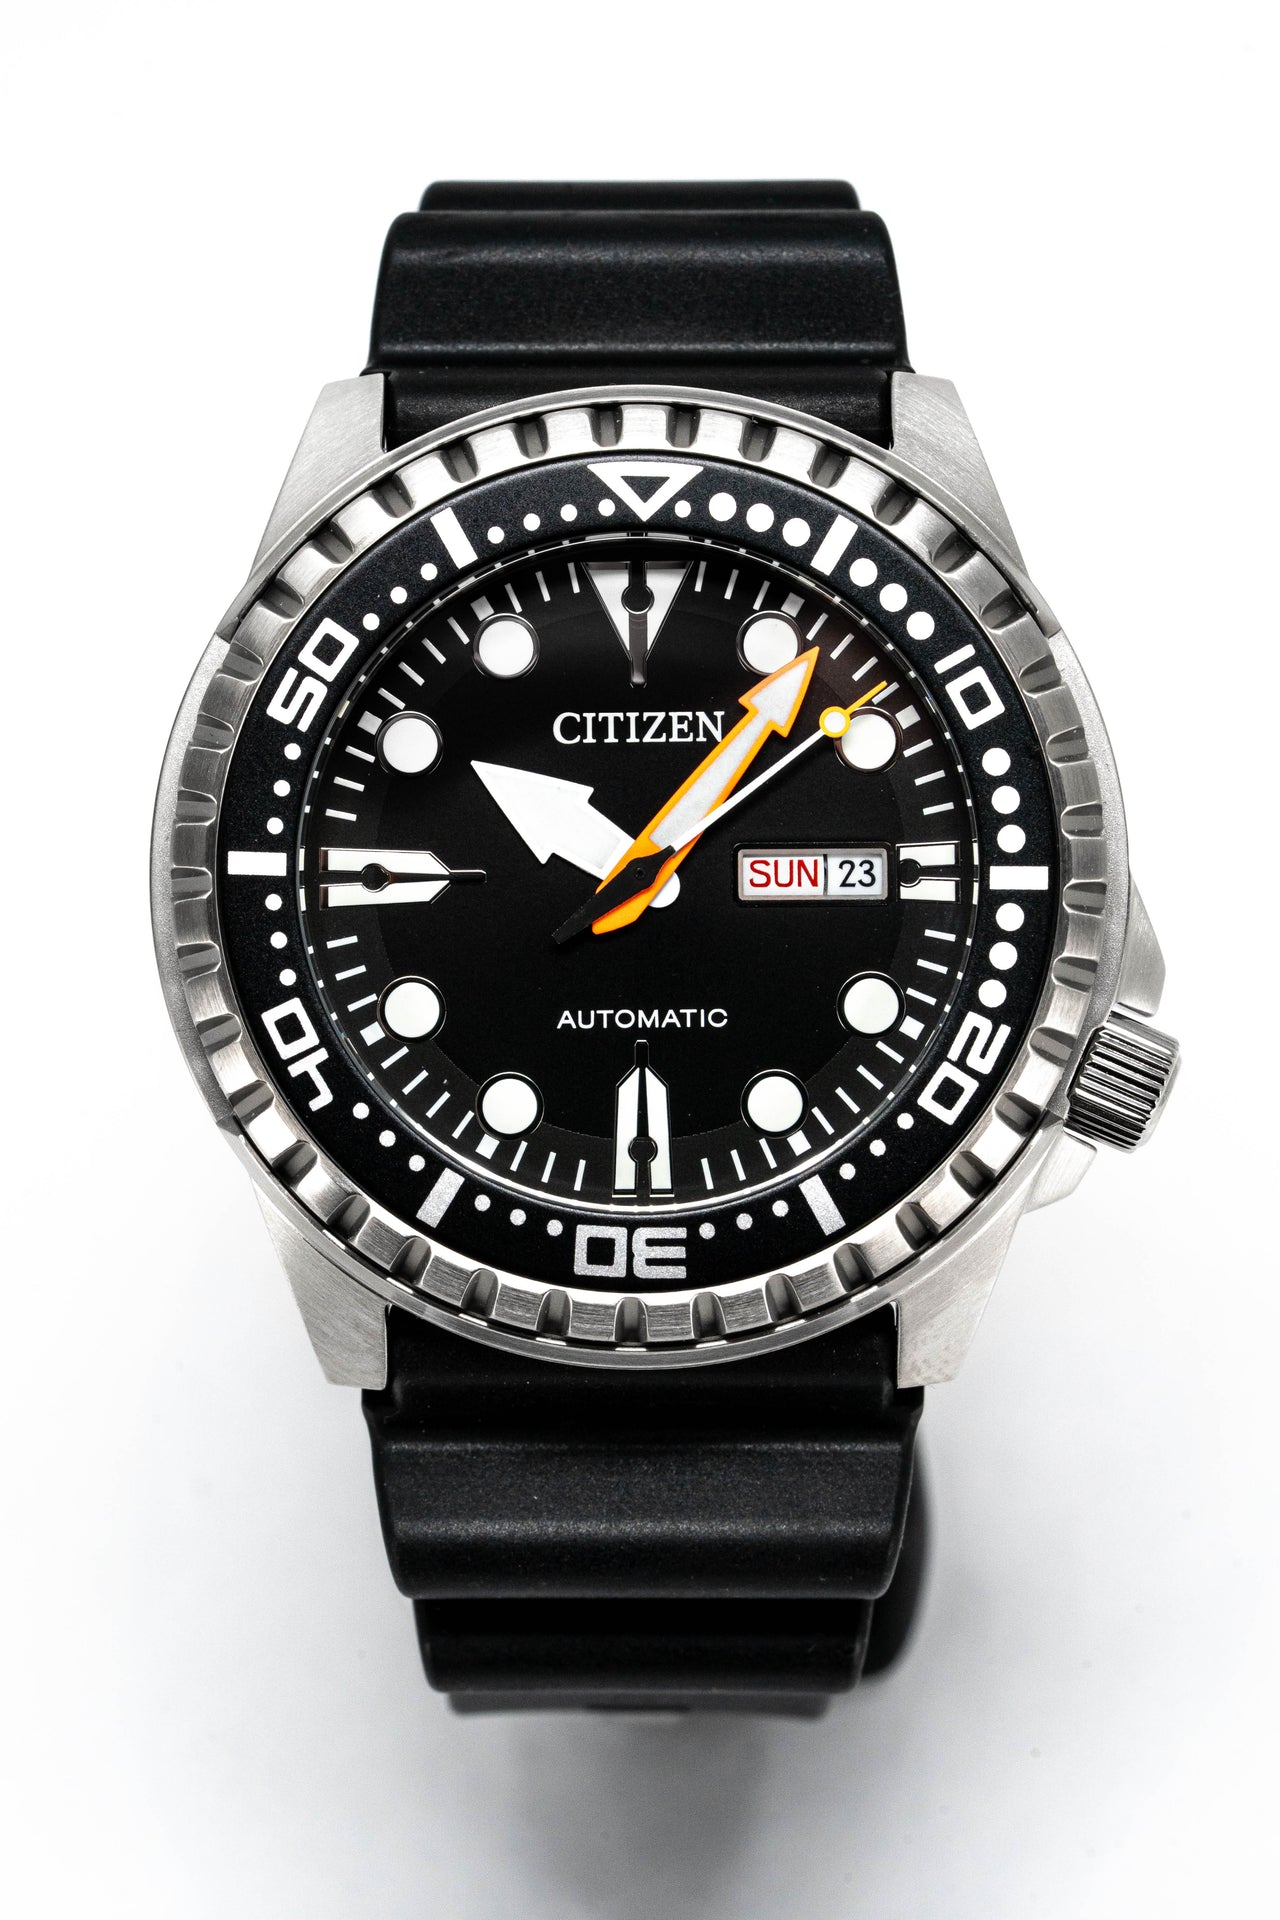 Citizen Men's Watch Mechanical Automatic Black NH8380-15E – Watches &  Crystals